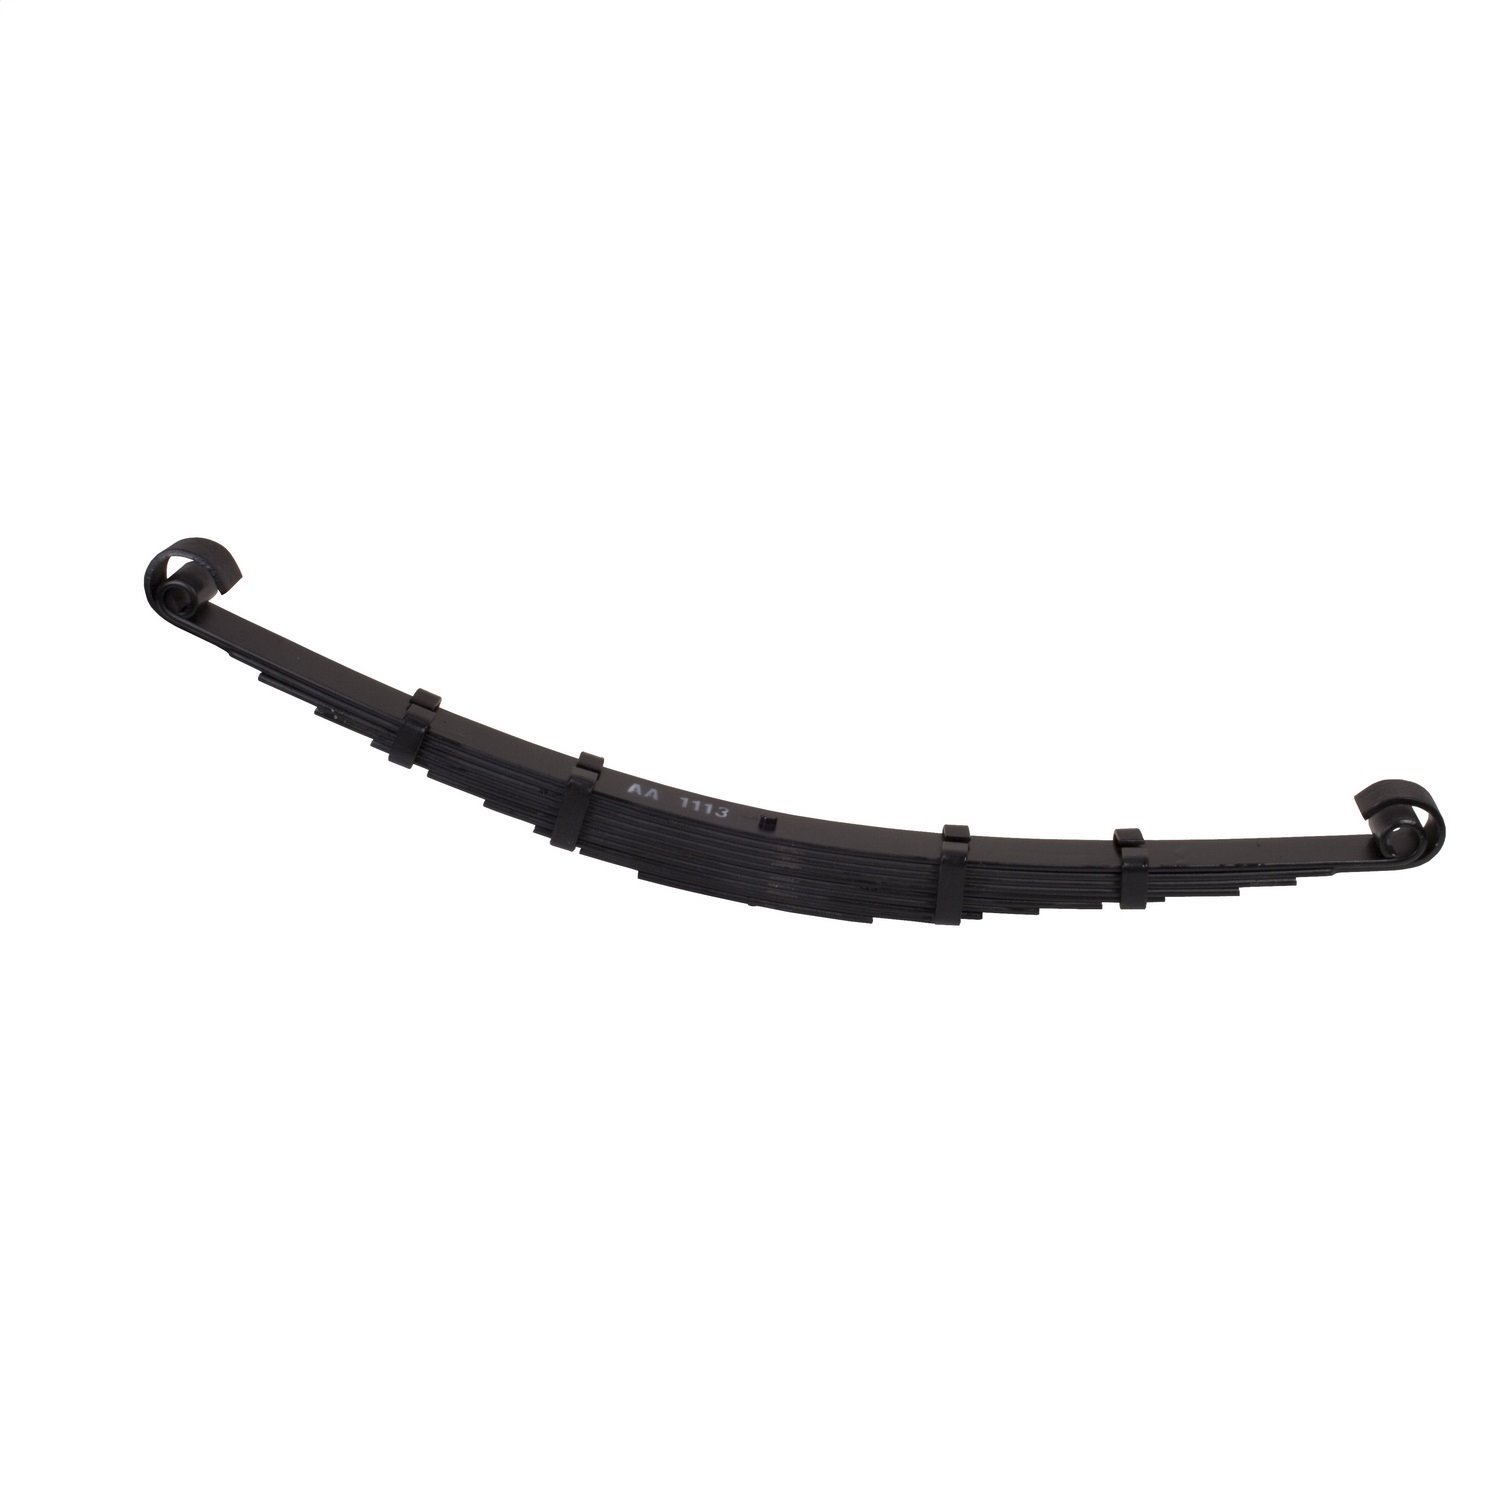 Stock replacement 10 leaf front spring from Omix-ADA, Fits 41-45 Willys MBs 46-49 CJ2A and 49-53 CJ3A. Left or right side.